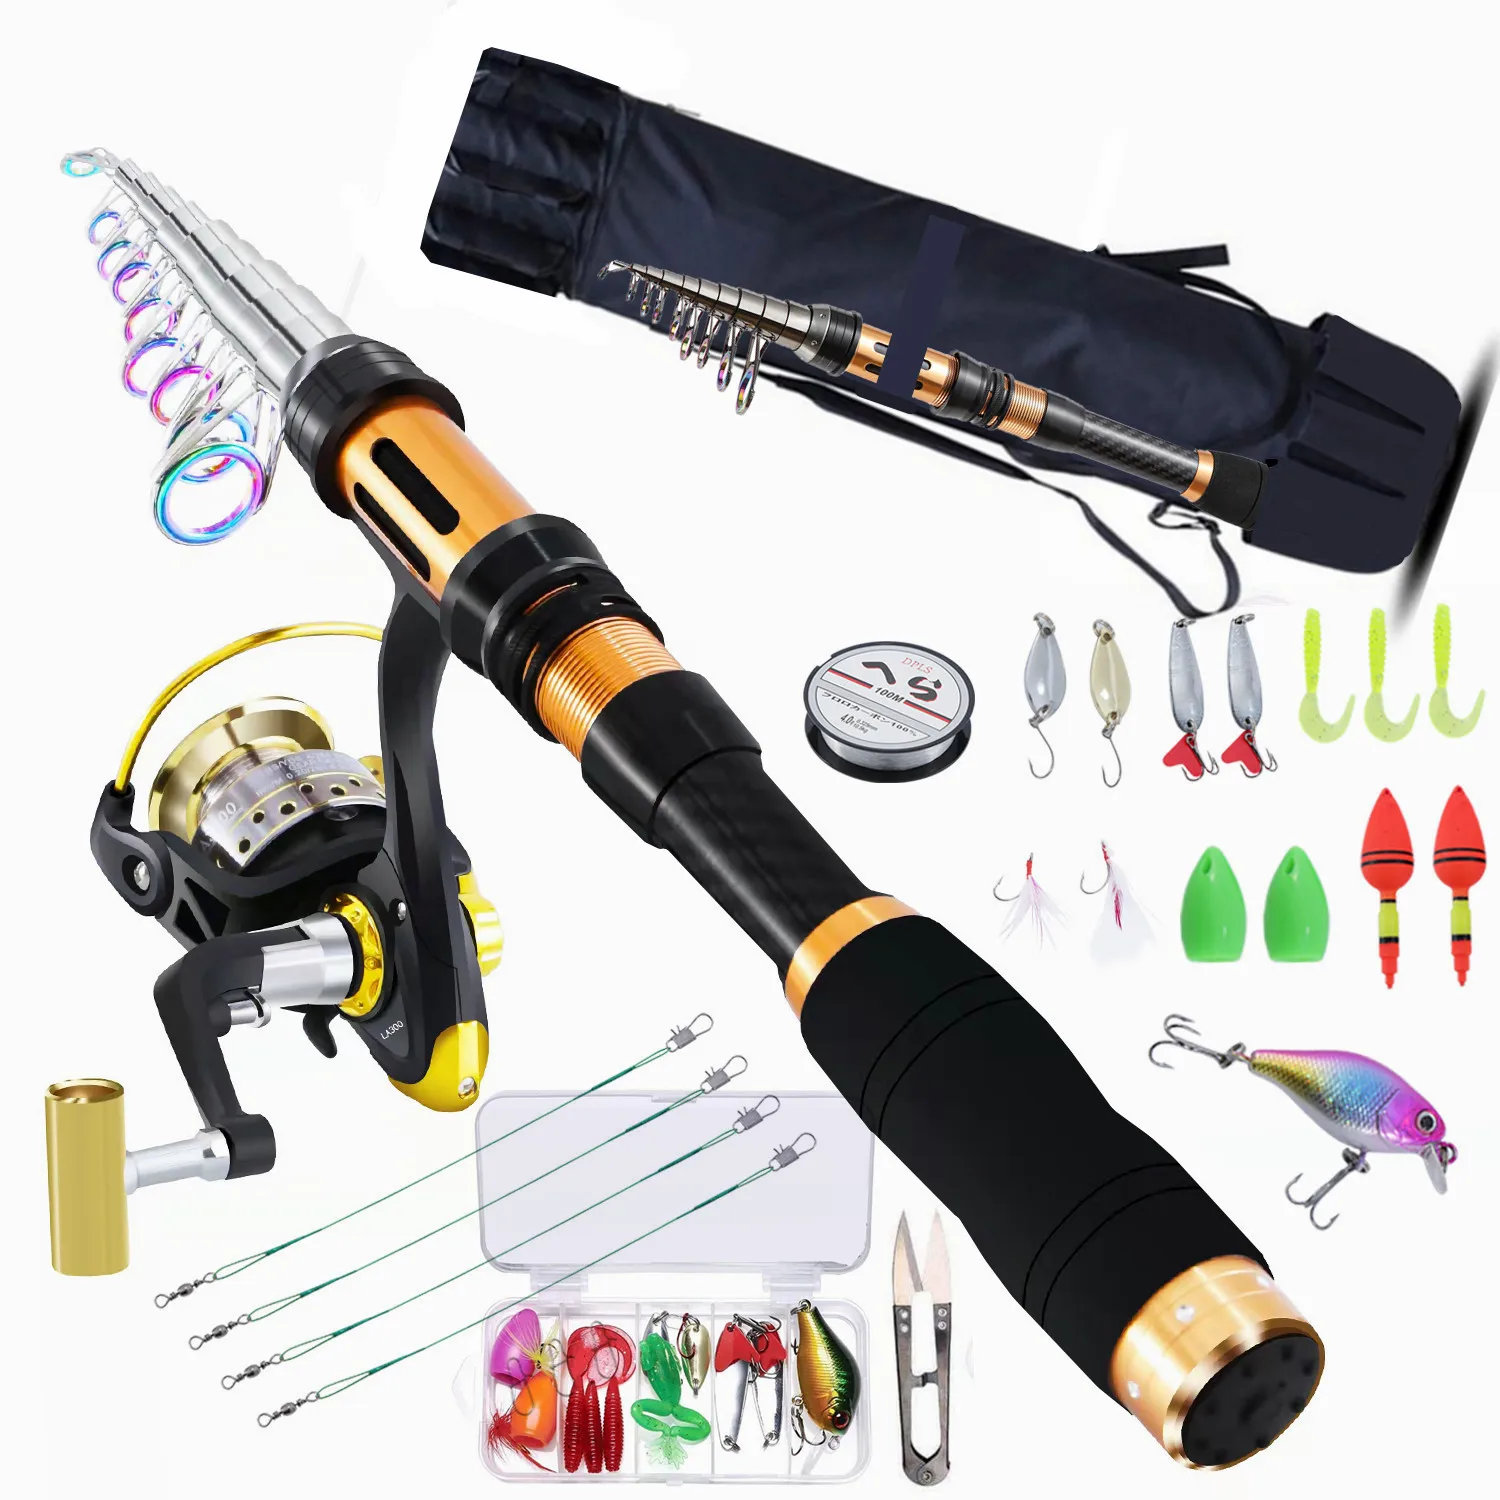 https://ae01.alicdn.com/kf/S04dc0fcf32f0419a8e239f43da81f8d04/BNTTEAM-Telescopic-Fishing-Rod-and-Spinning-Reel-Combo-Set-with-Line-Lures-Kit-Accessories-Suitable-for.jpg